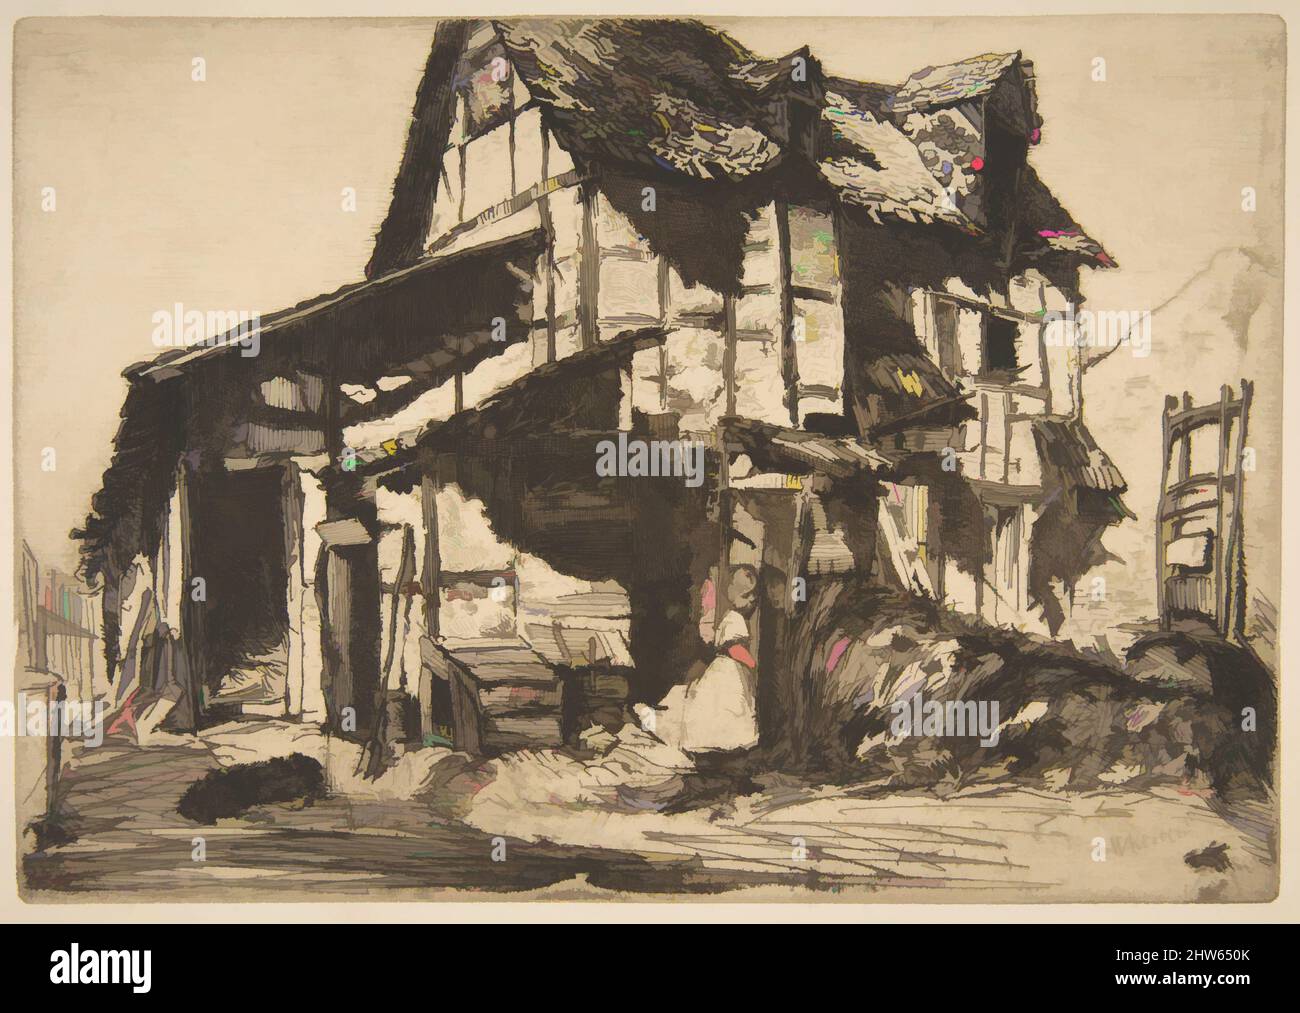 Art inspired by The Unsafe Tenement (The Old Farm), 1858, Etching; fourth state of four (Glasgow); printed in black ink on medium weight tan antique laid paper, Plate: 6 1/4 × 8 7/8 in. (15.8 × 22.6 cm), Prints, James McNeill Whistler (American, Lowell, Massachusetts 1834–1903 London, Classic works modernized by Artotop with a splash of modernity. Shapes, color and value, eye-catching visual impact on art. Emotions through freedom of artworks in a contemporary way. A timeless message pursuing a wildly creative new direction. Artists turning to the digital medium and creating the Artotop NFT Stock Photo